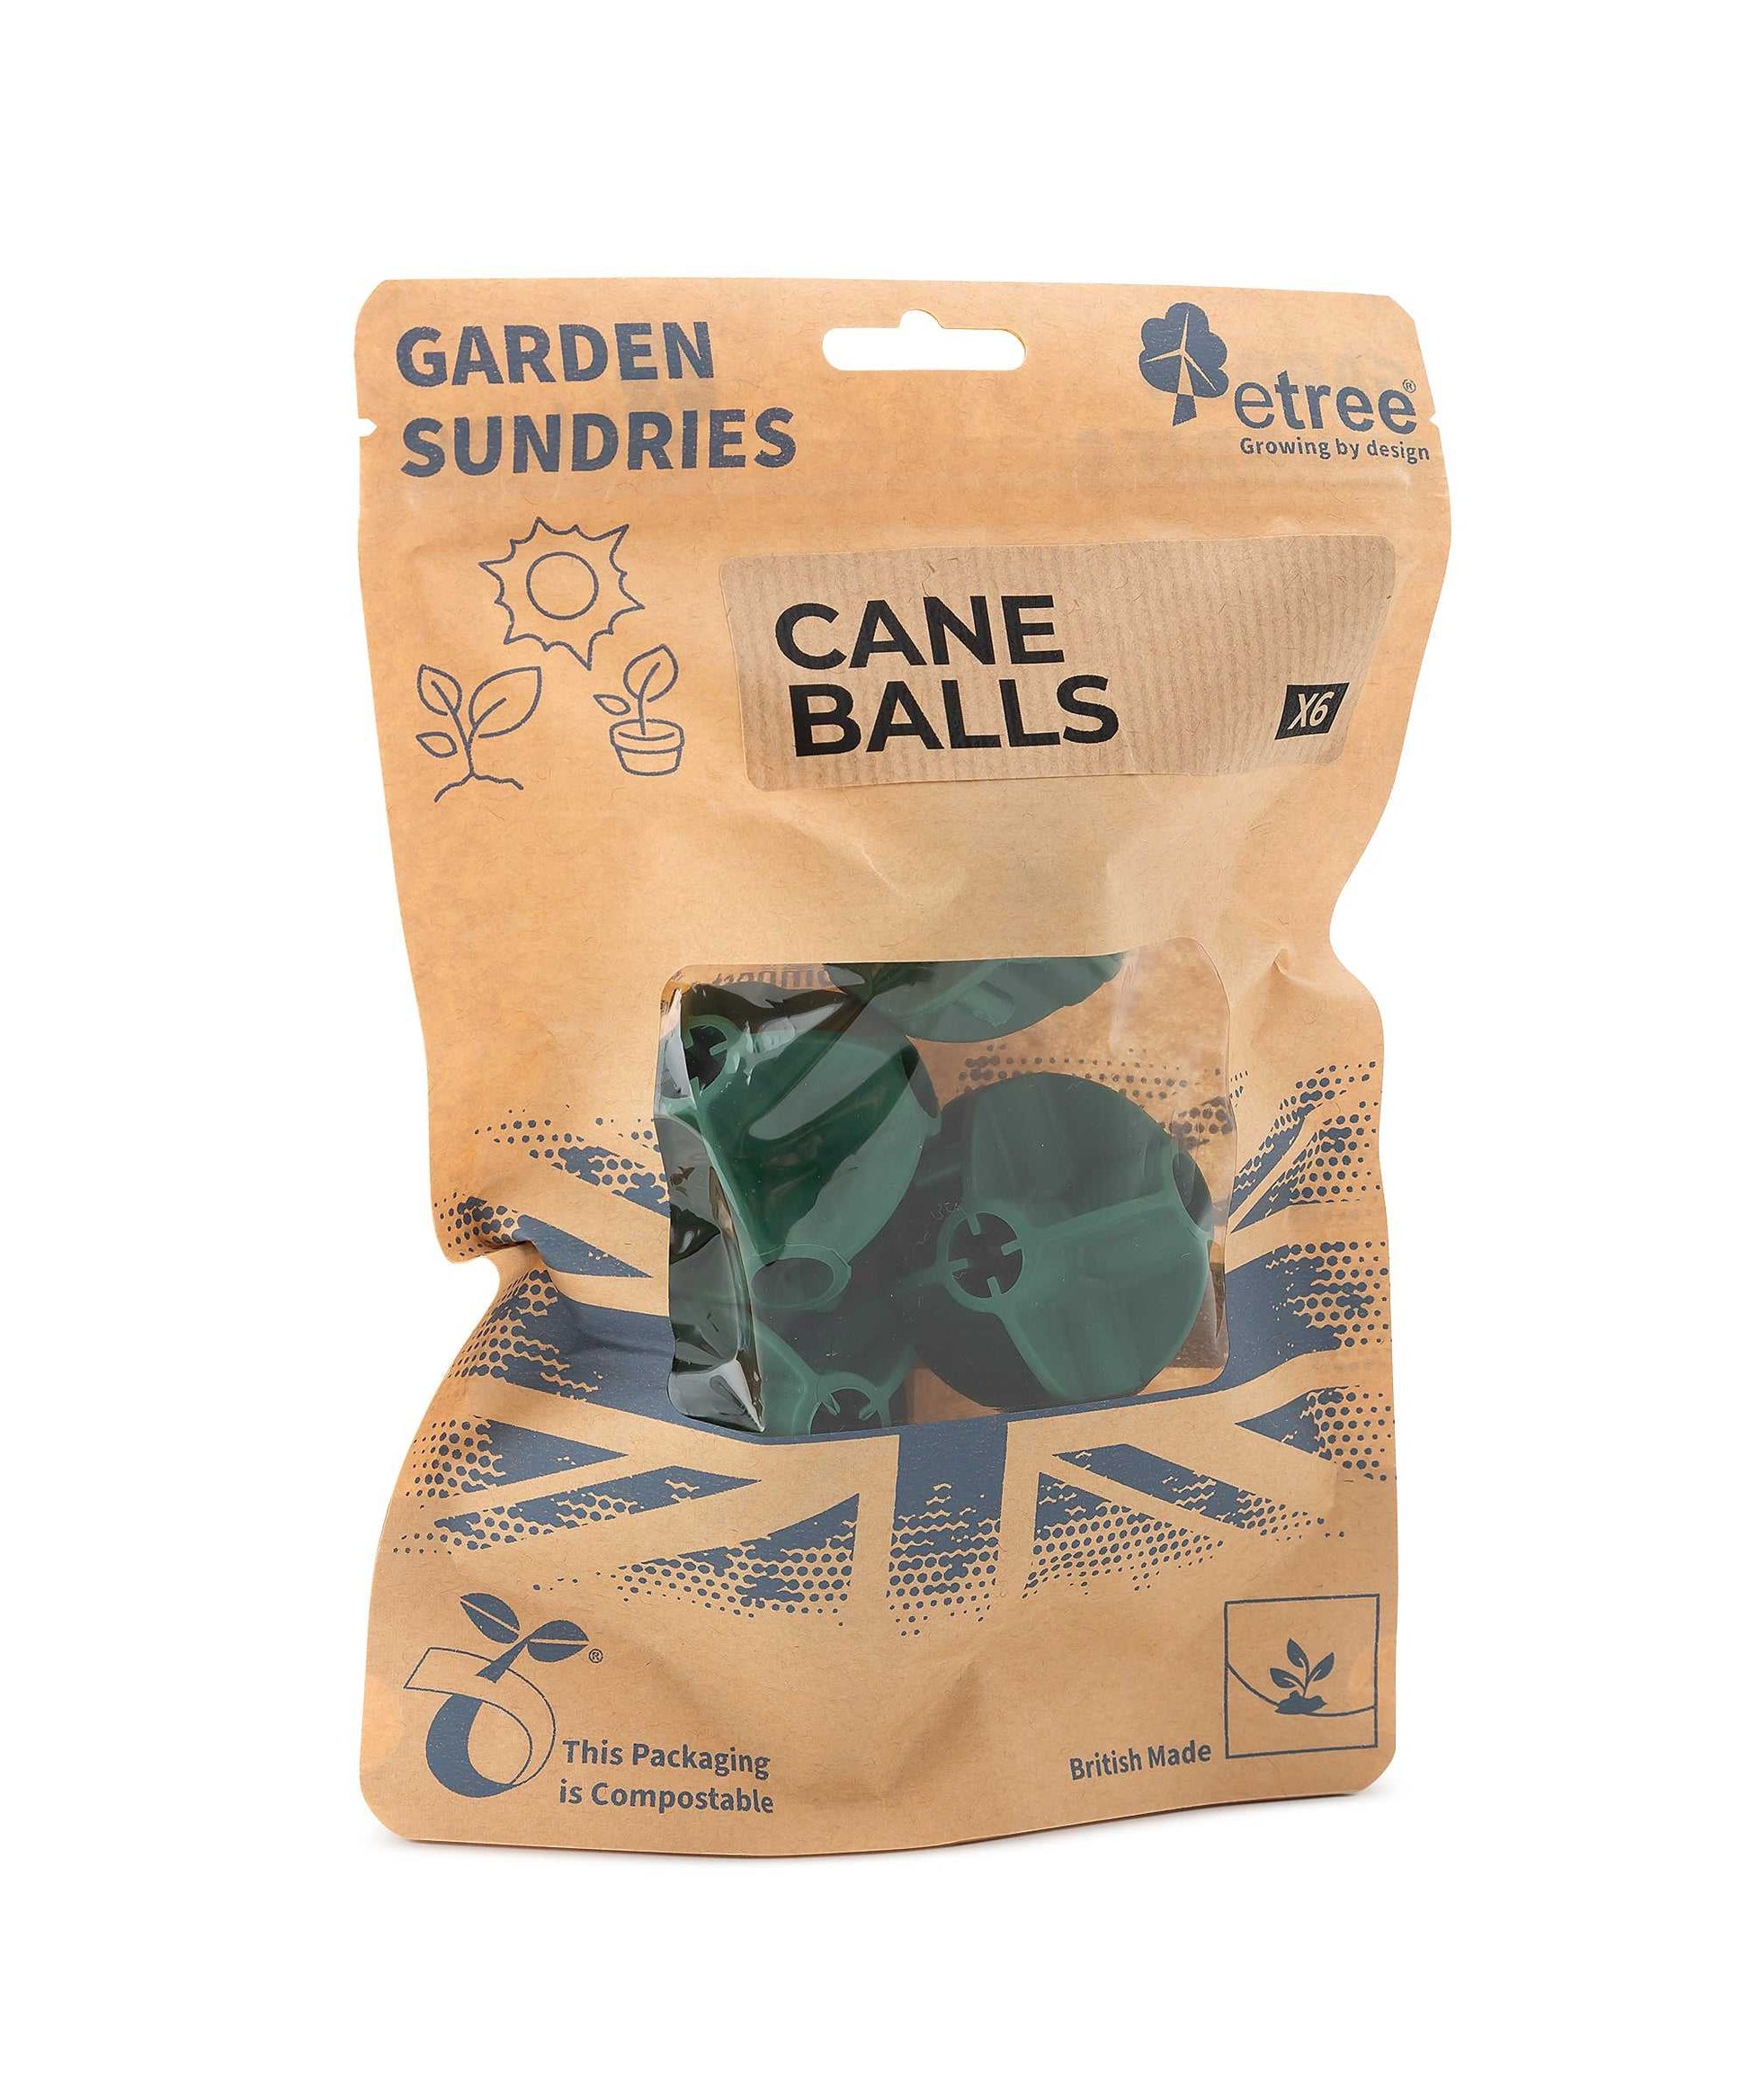 Etree Cane Balls - Build netting cages and plant structures the simple way. Gardening Accessories